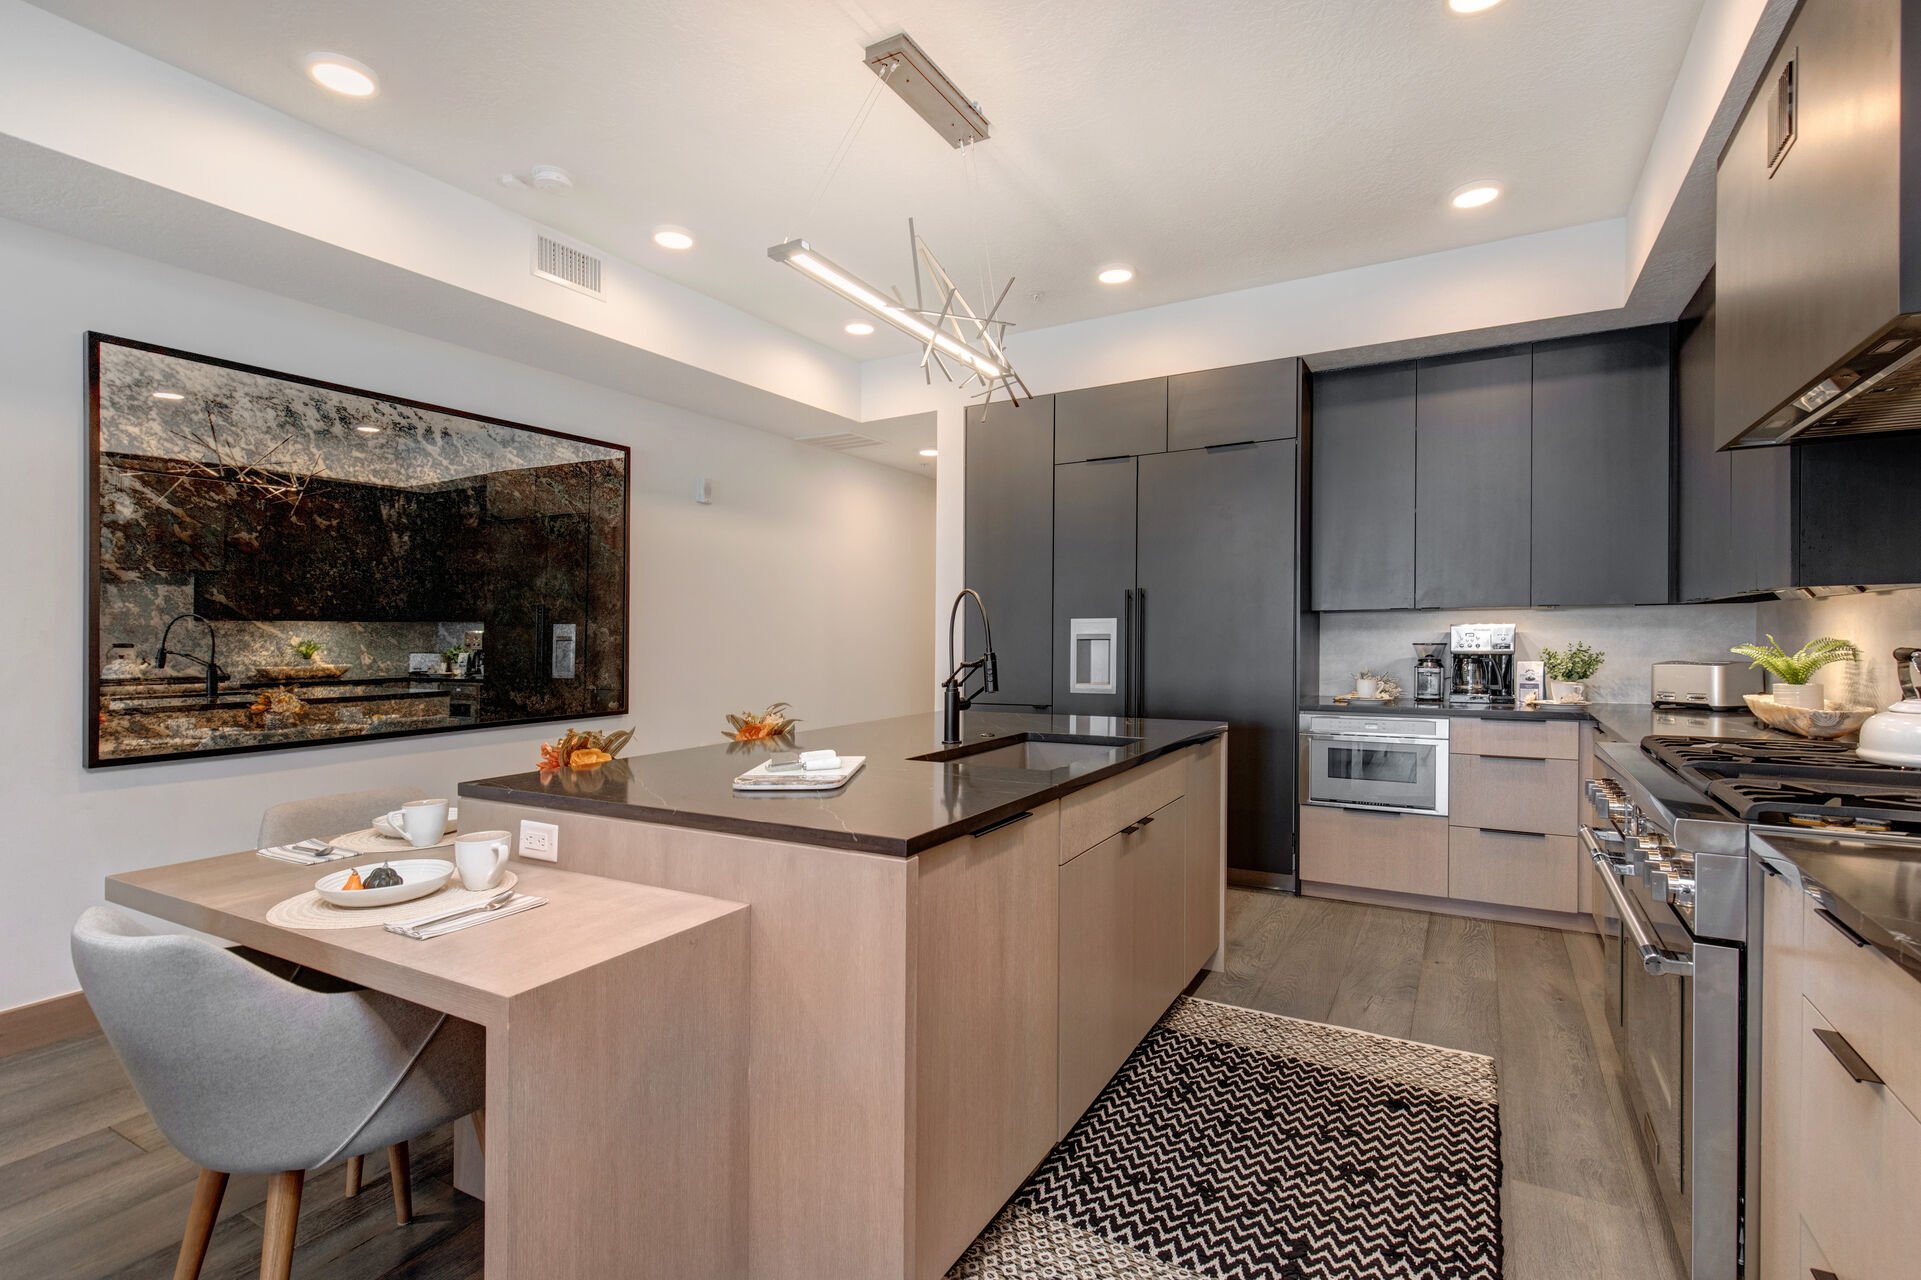 Fully Equipped Kitchen with high-end stainless steel appliances, a SubZero refrigerator with ice maker, gorgeous stone counter tops, and bar seating for four.